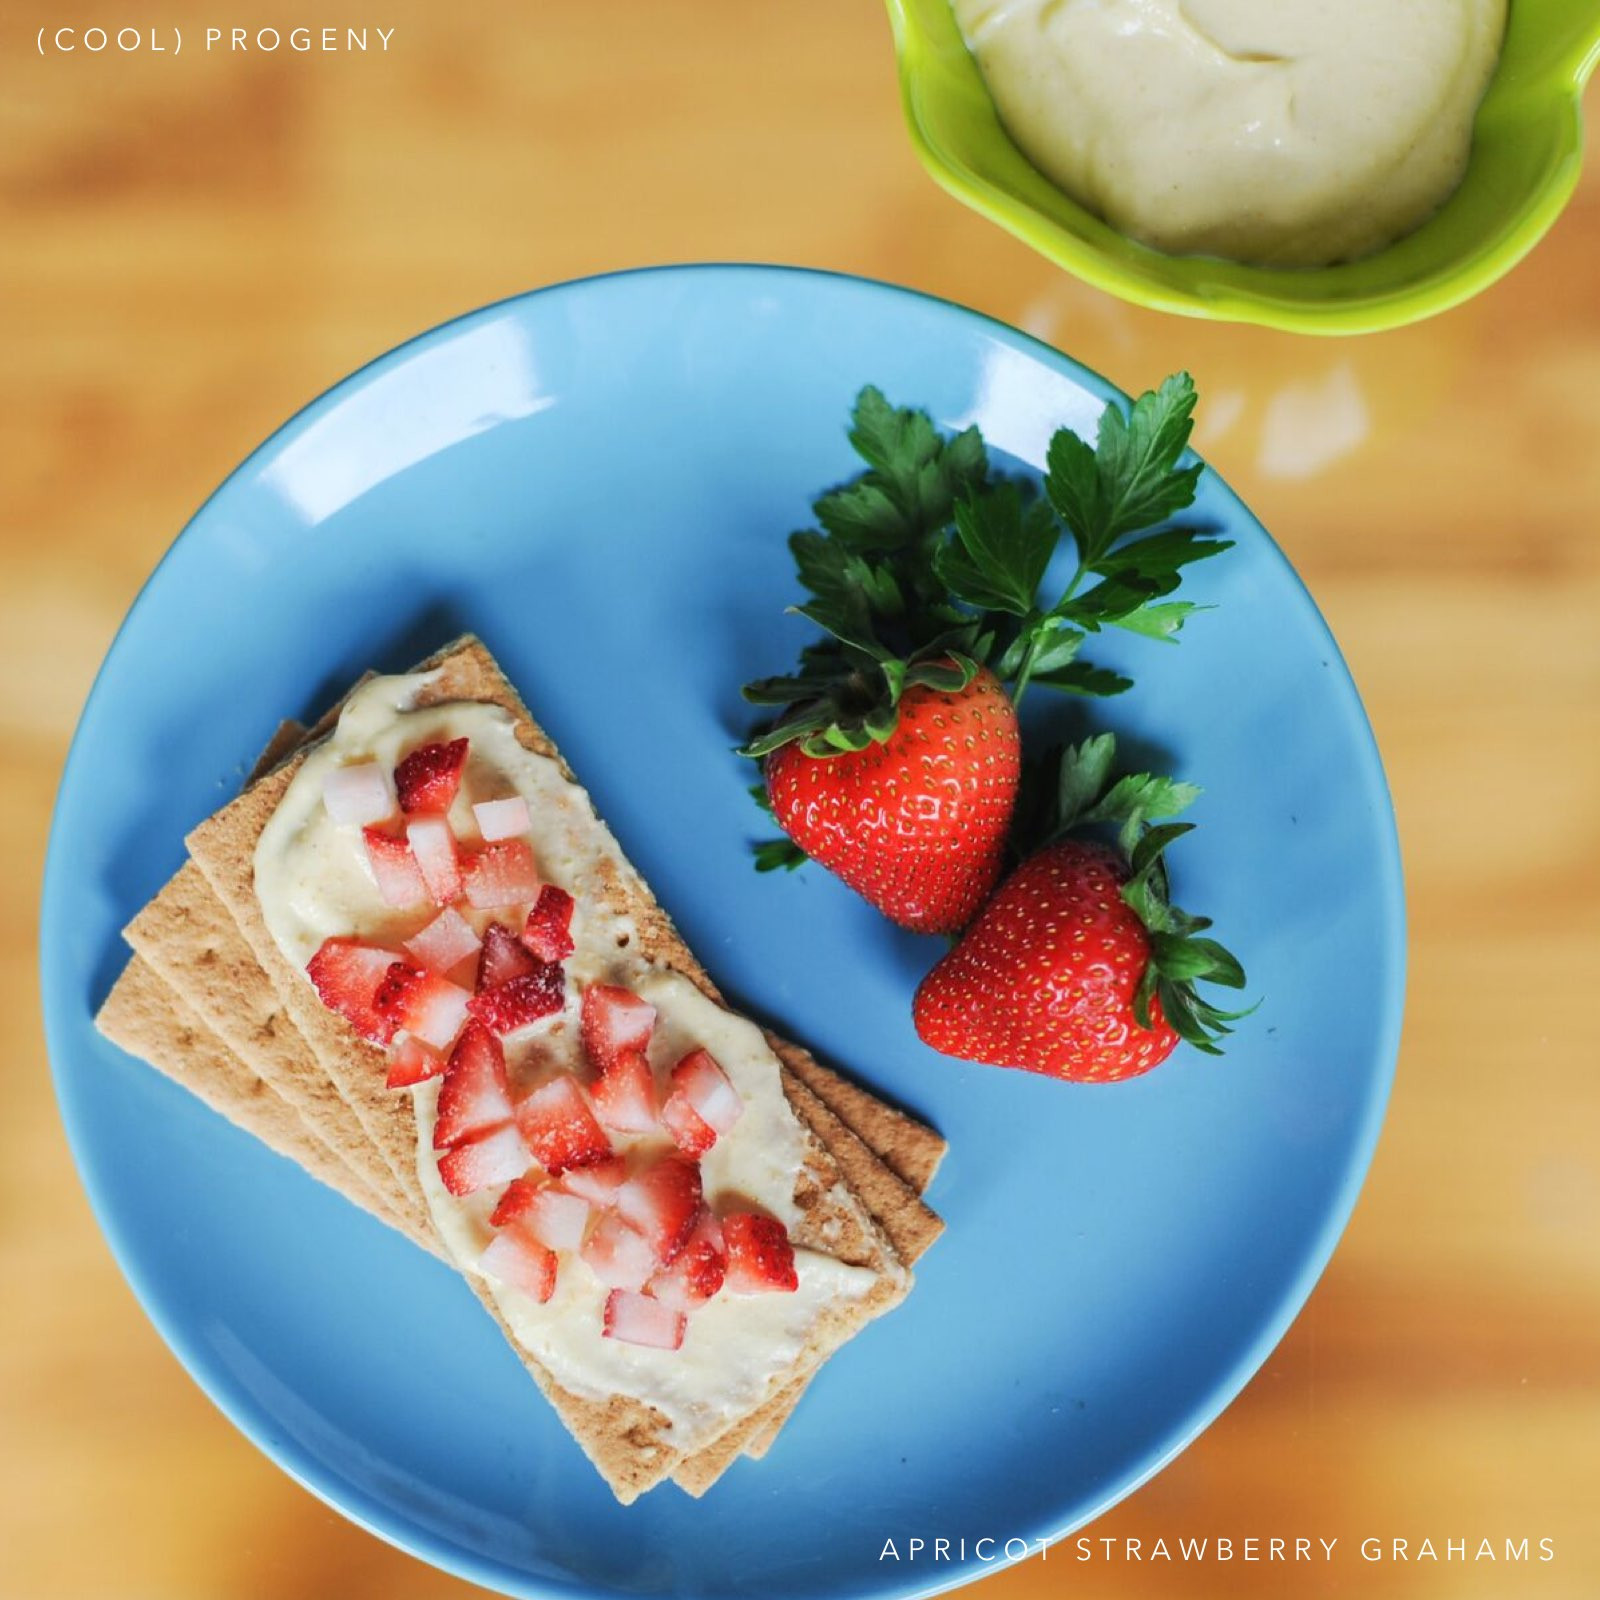 Top 15 Most Shared Healthy Snacks for Kids